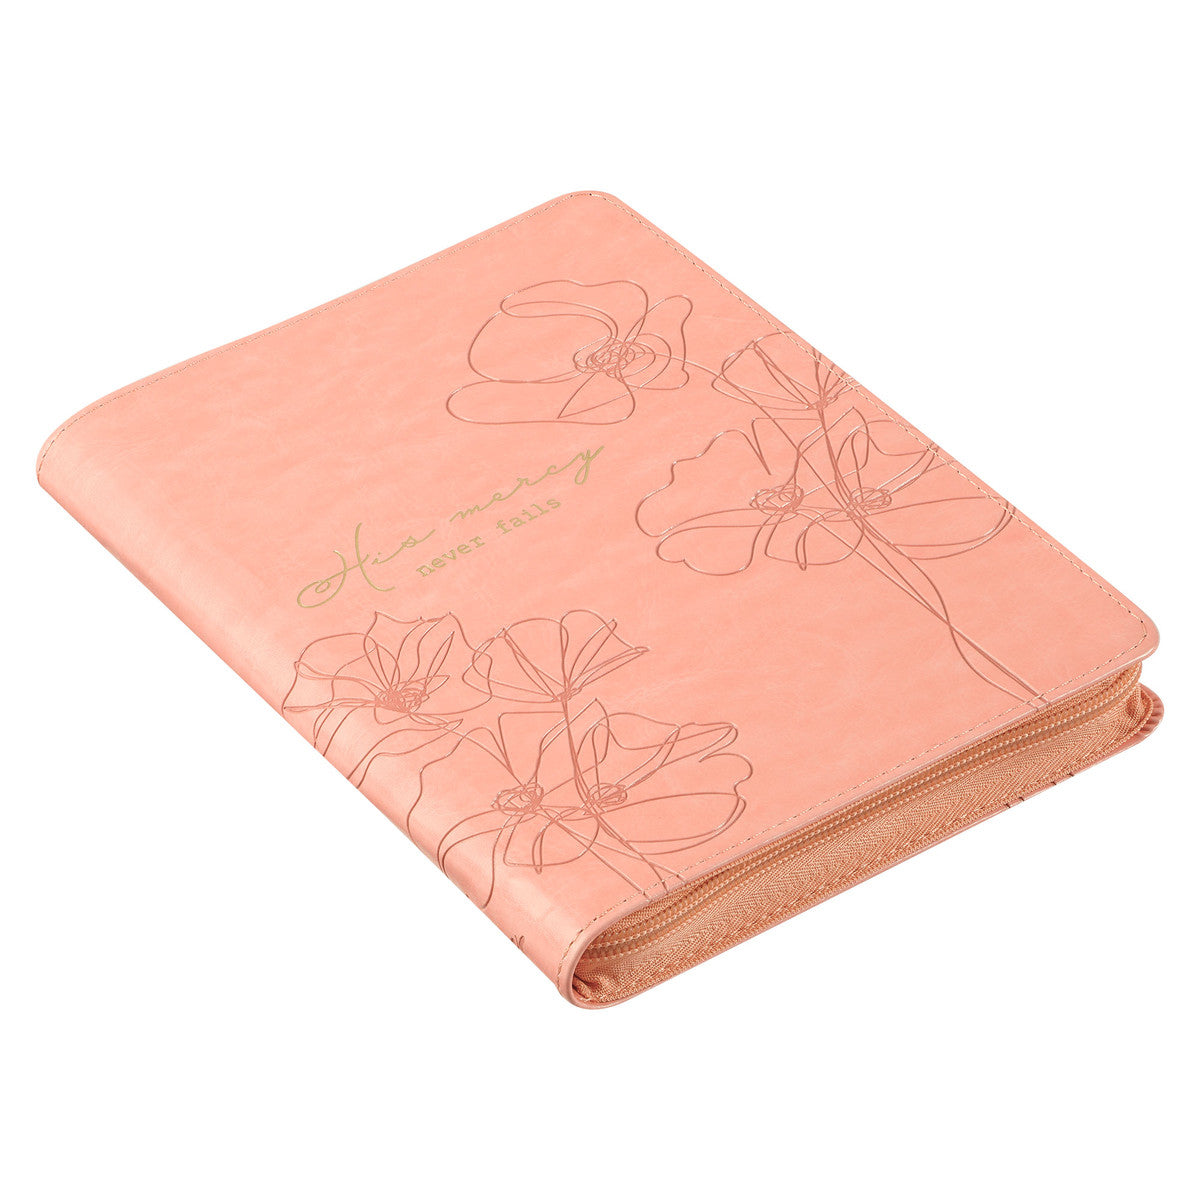 Mercy Blossom Pink Faux Leather Journal with Zipper Closure